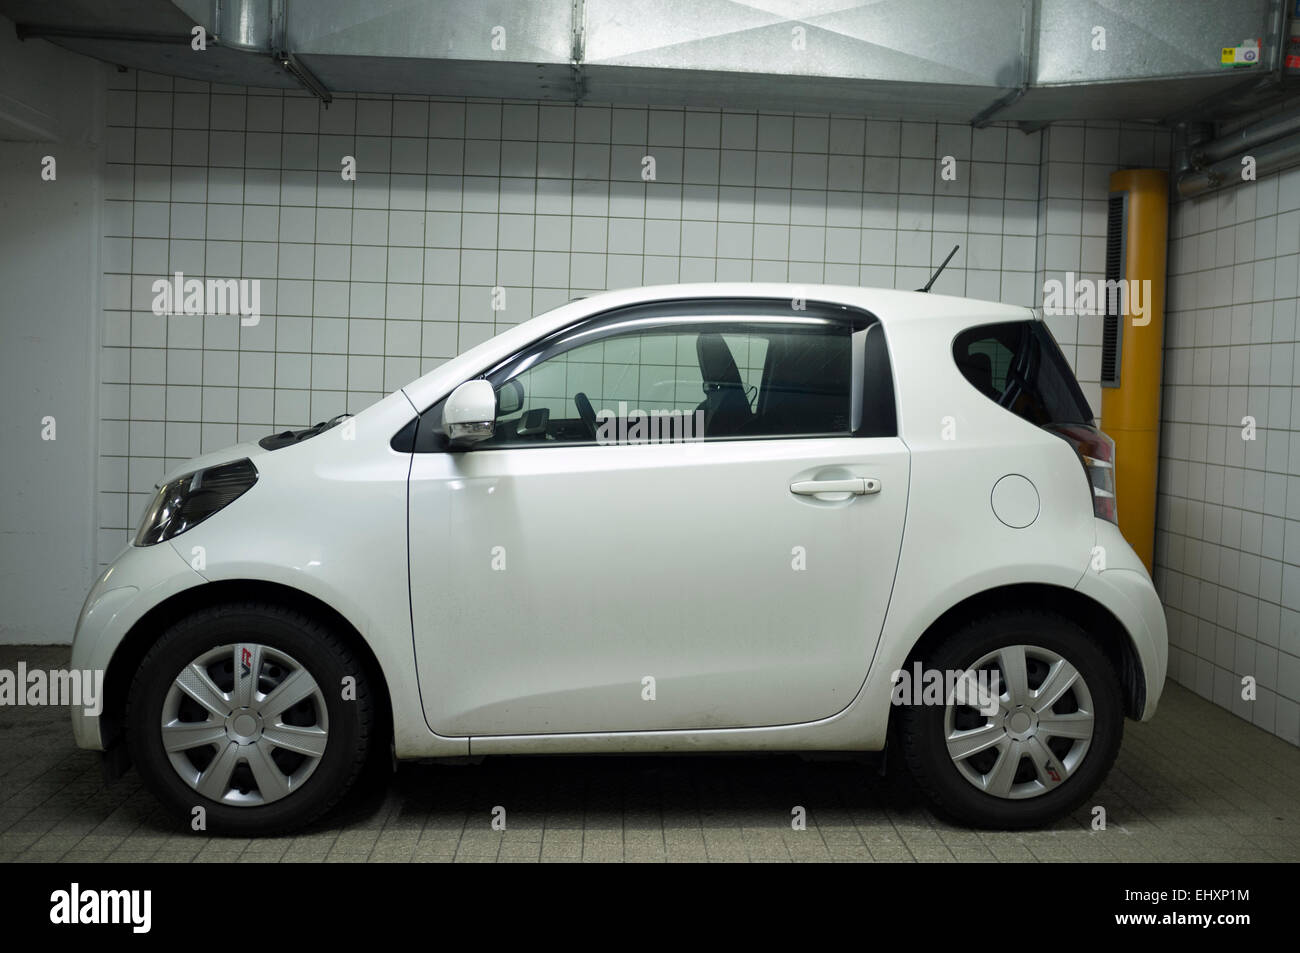 Toyota IQ two-seater car parked in underground car park Stock Photo